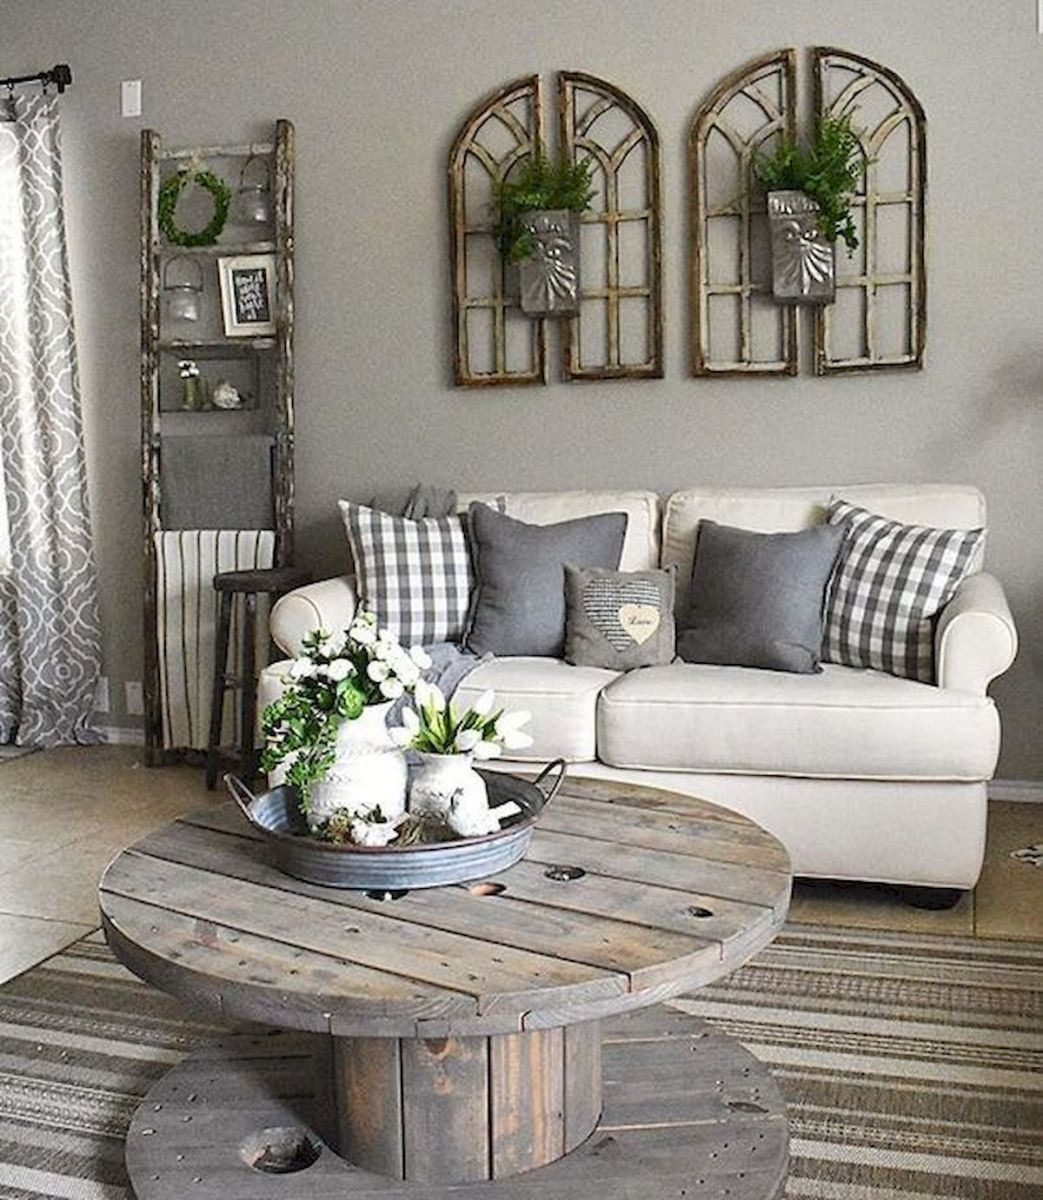 Wall Decor For Living Room
 75 Best Farmhouse Wall Decor Ideas for Living Room 57